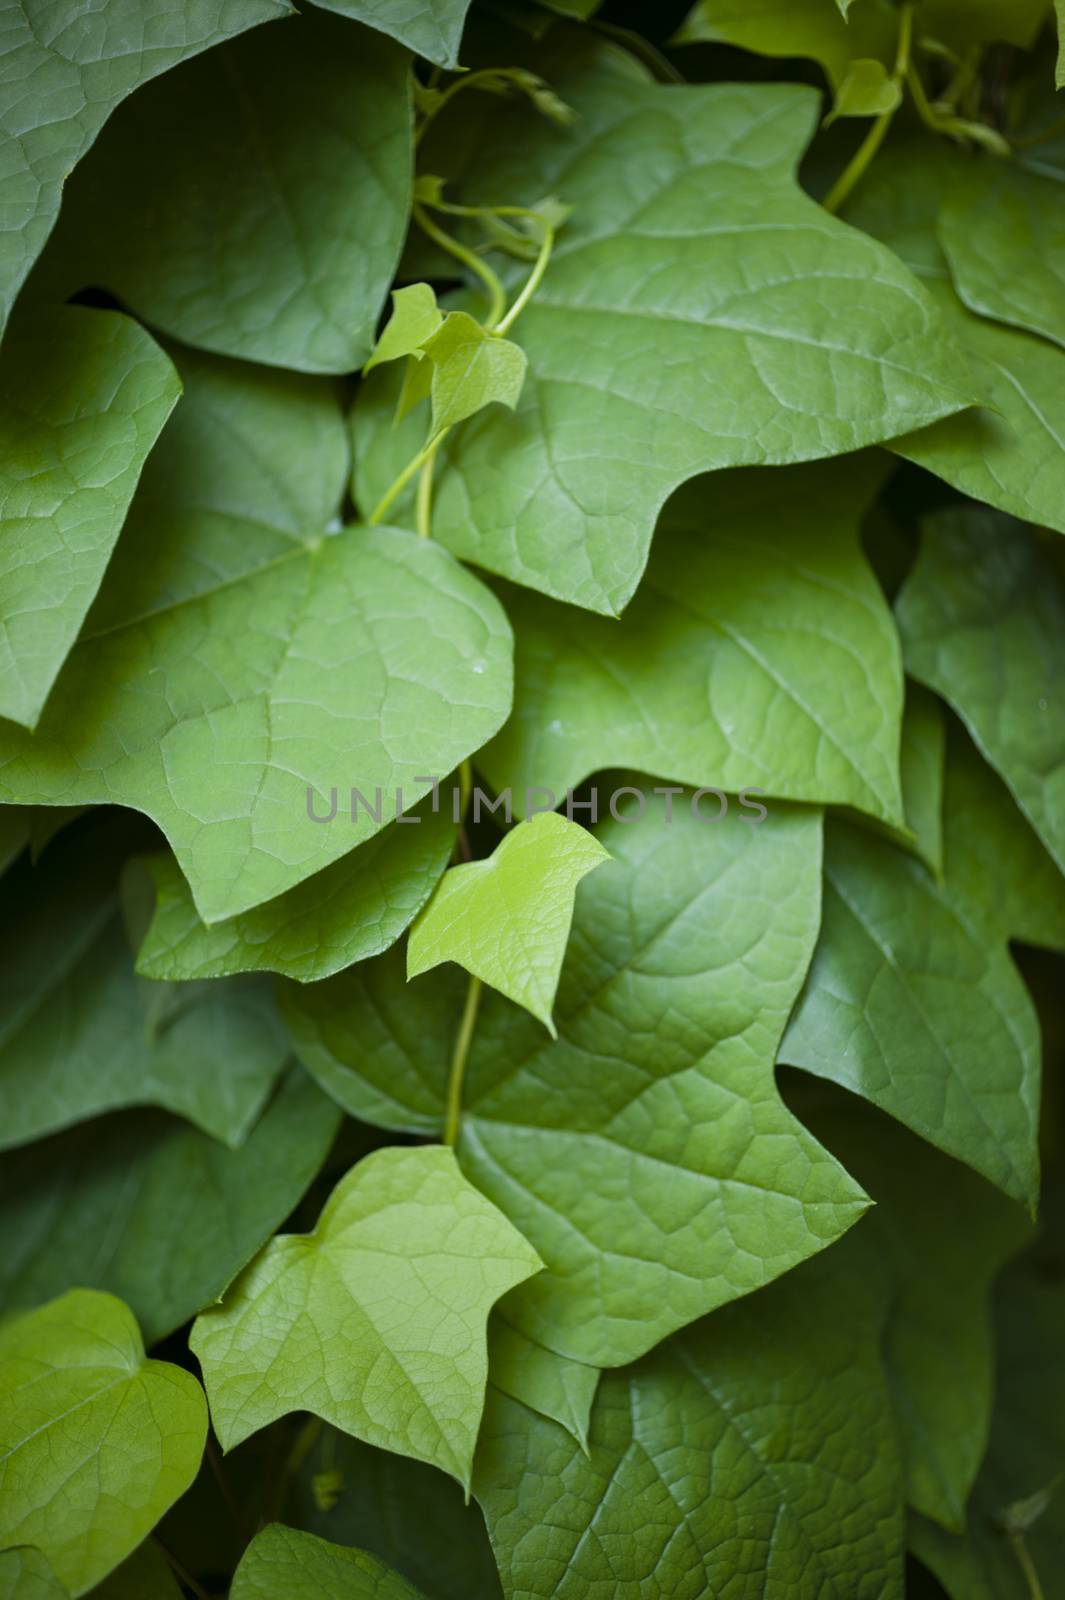 Hedera leavs, commonly called ivy, by AlessandroZocc